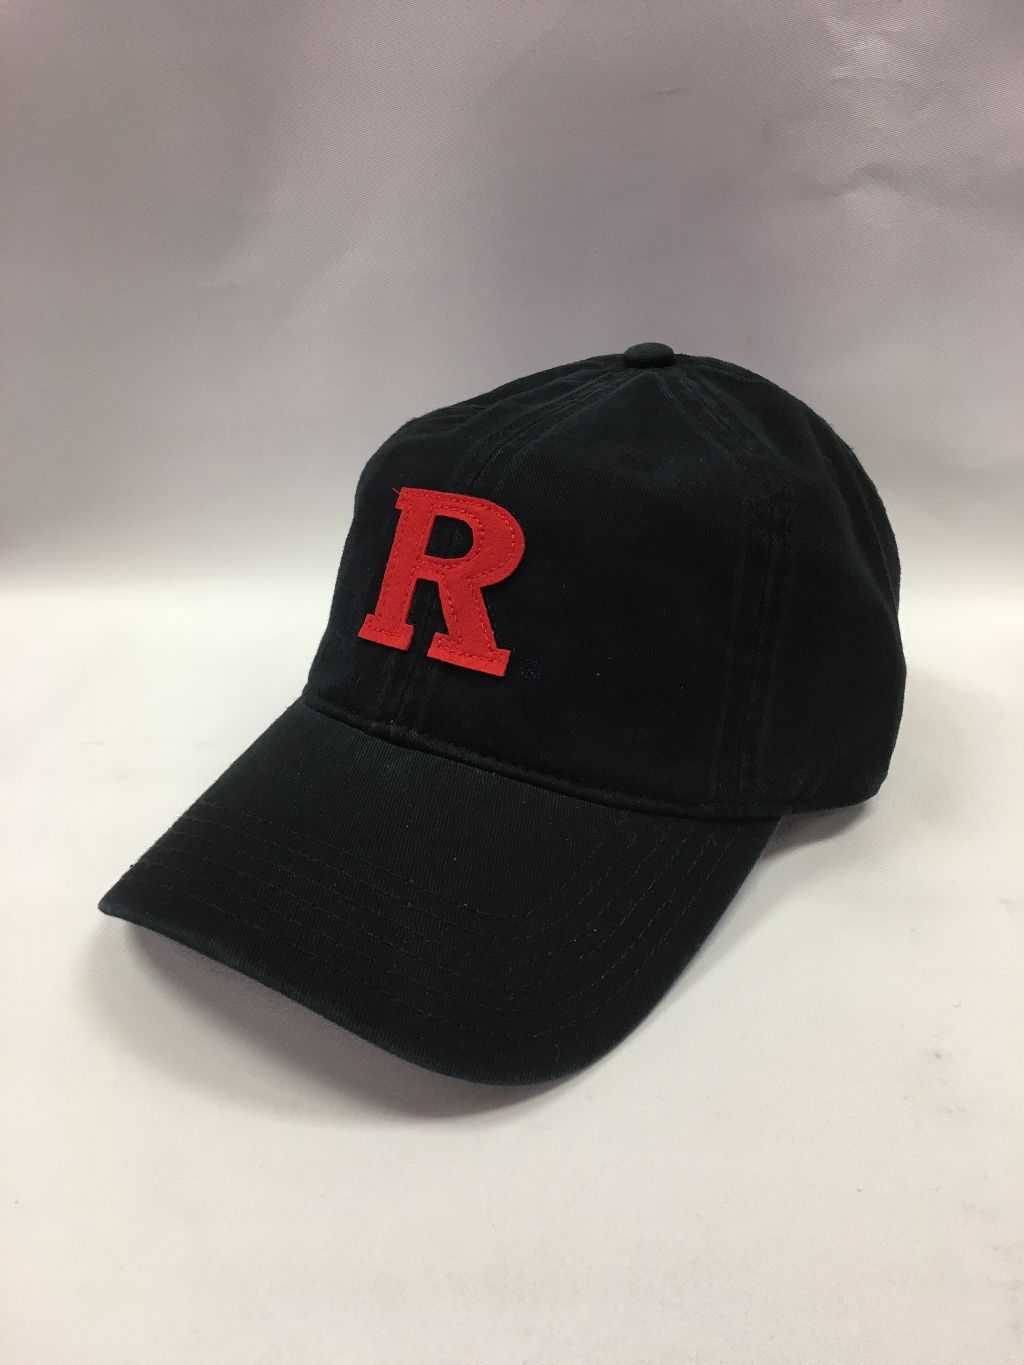 Rutgers Legacy Cotton Twill Hat Black - Scarlet Fever Rutgers Gear